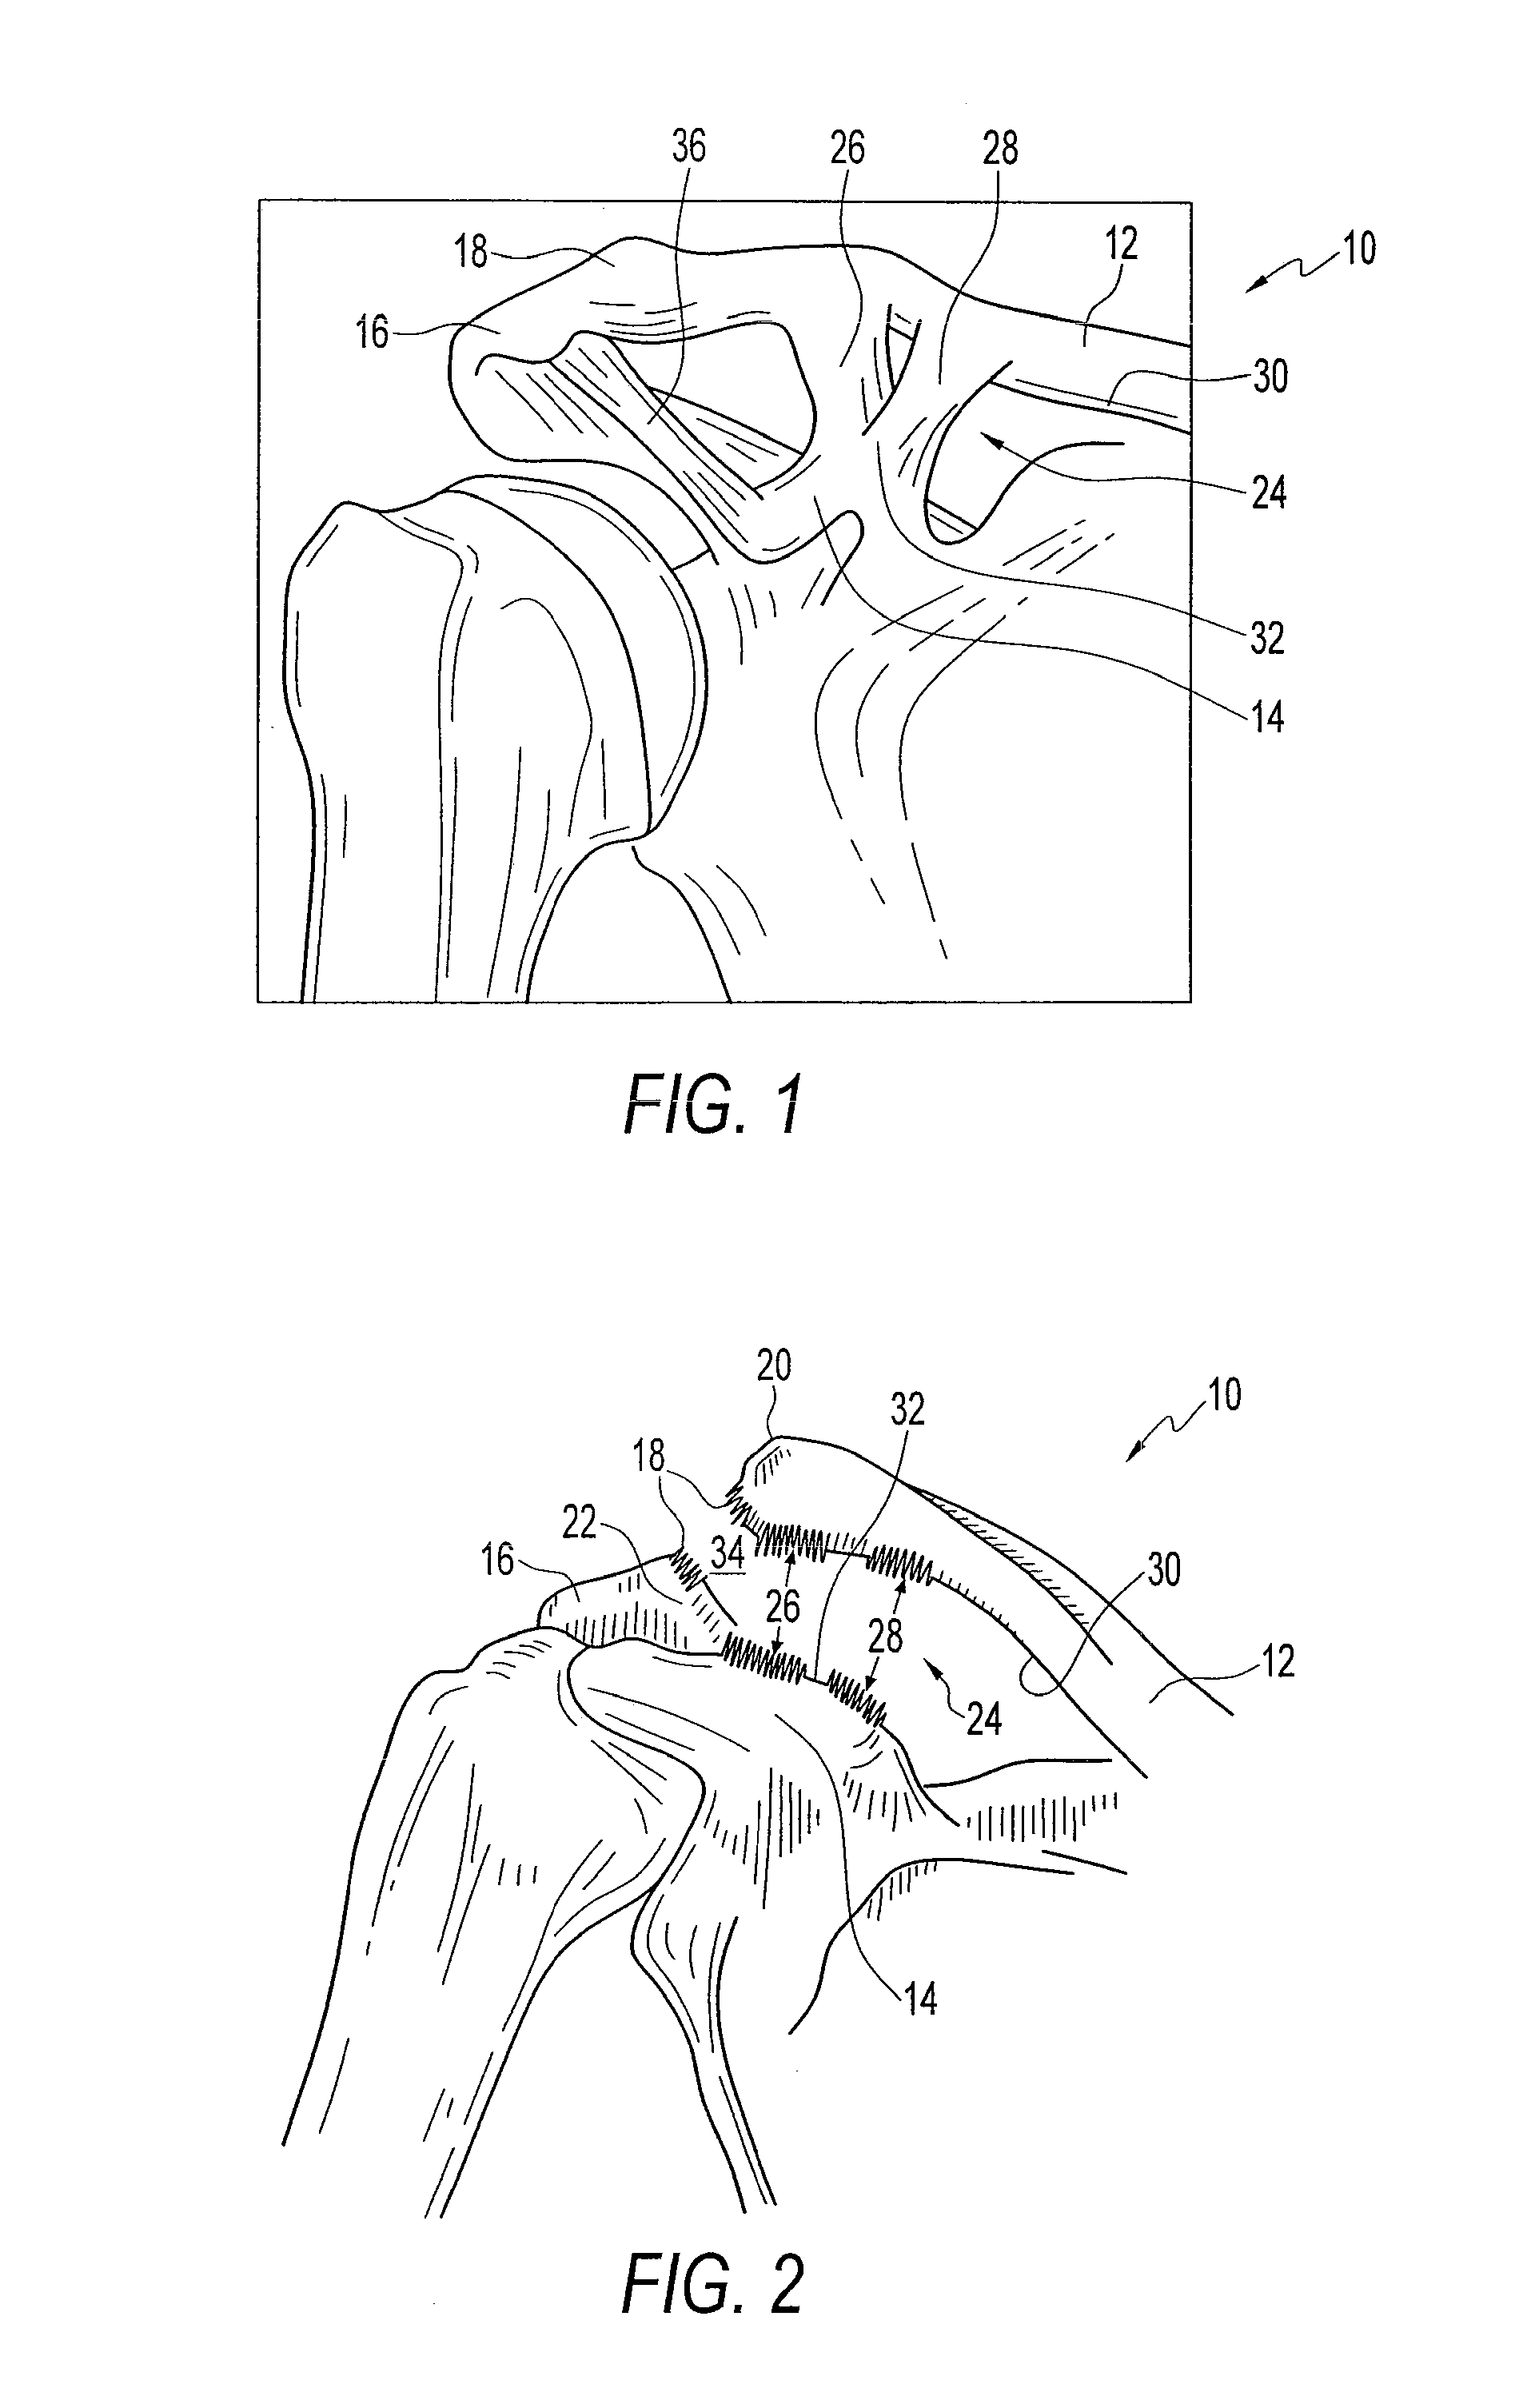 Method and apparatus for internal fixation of an acromioclavicular joint dislocation of the shoulder